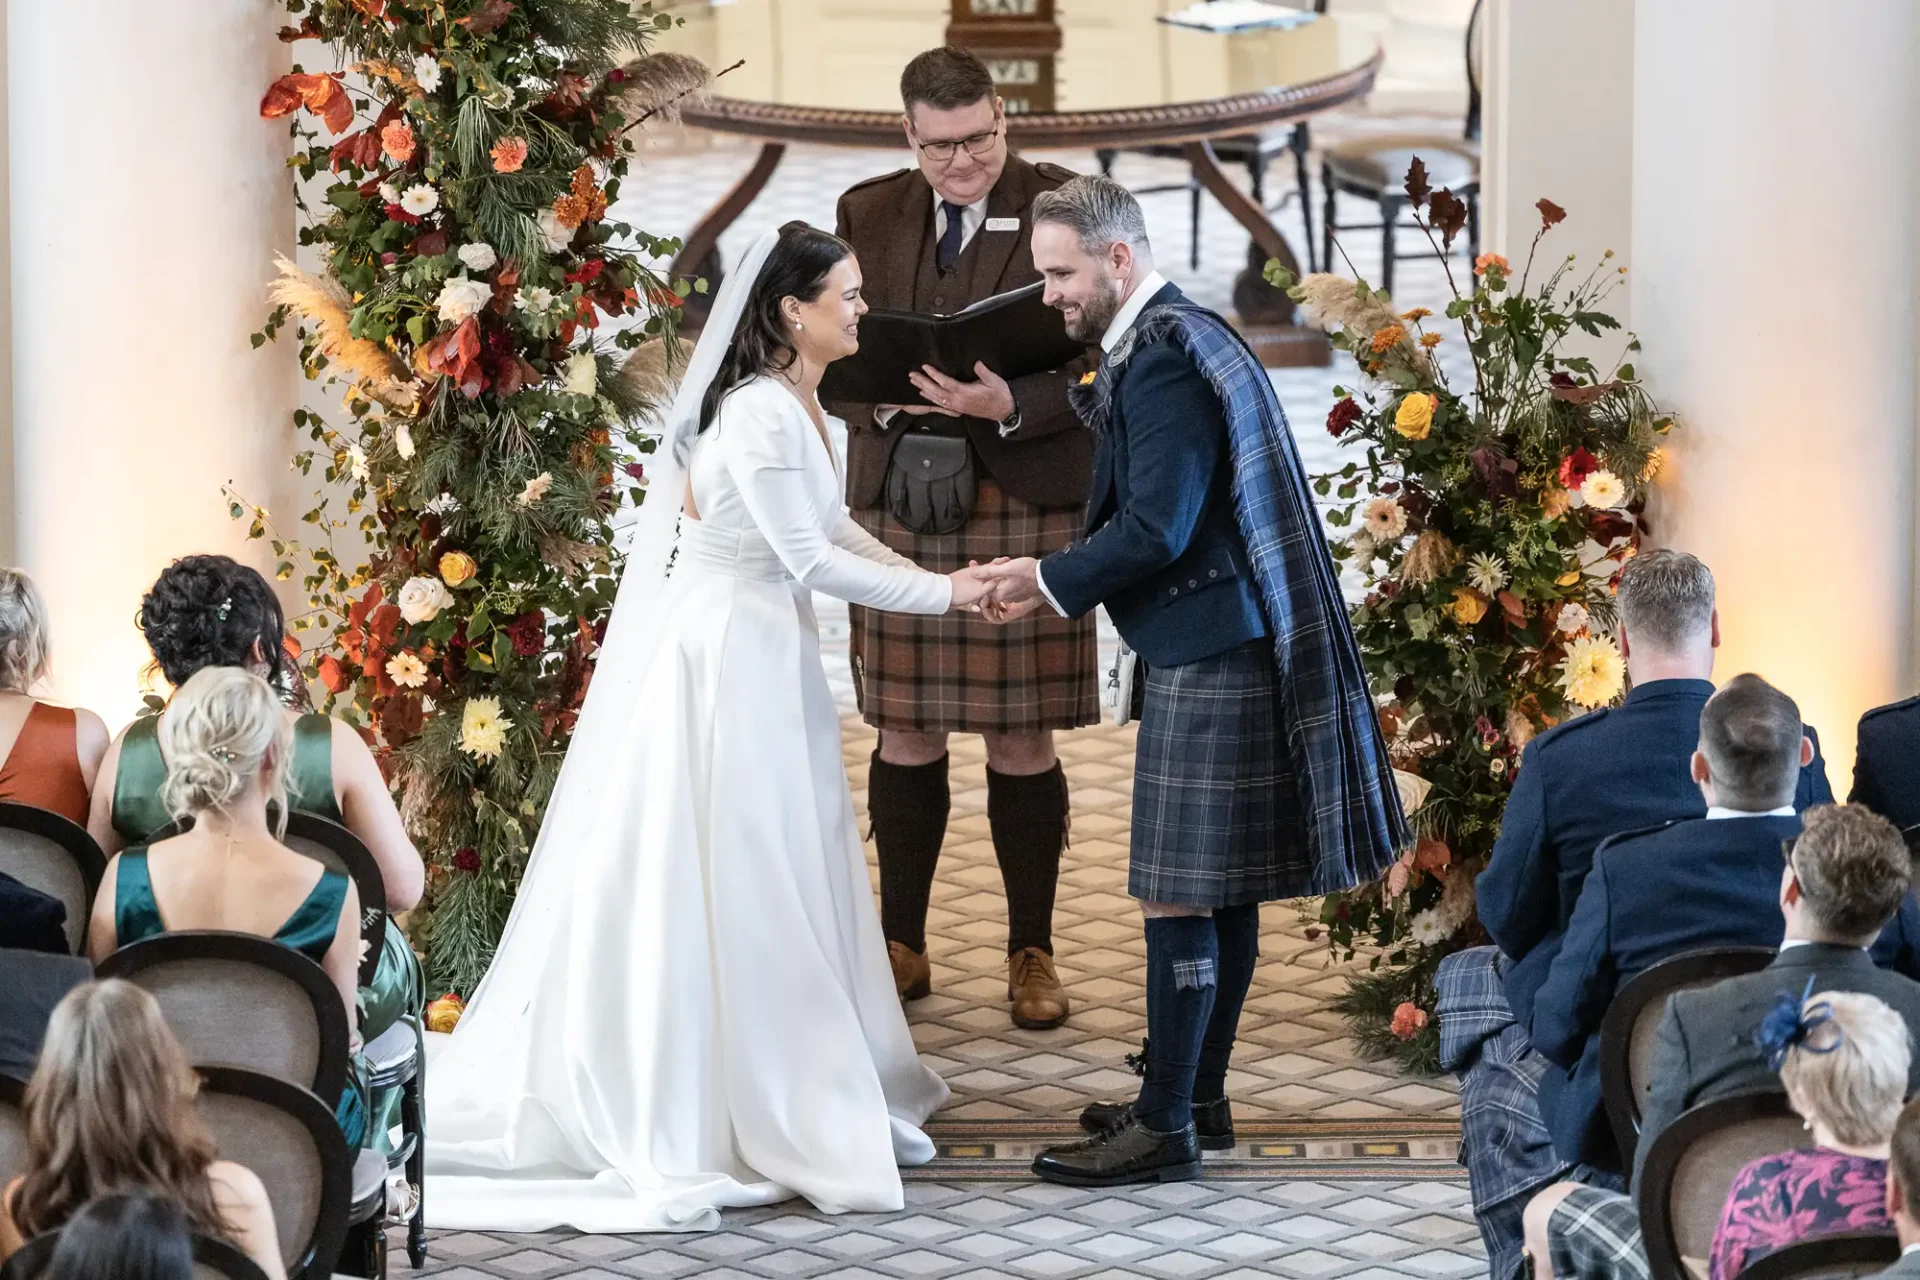 A bride and groom holding hands at their wedding ceremony, surrounded by floral decorations and guests, with the groom wearing a kilt.